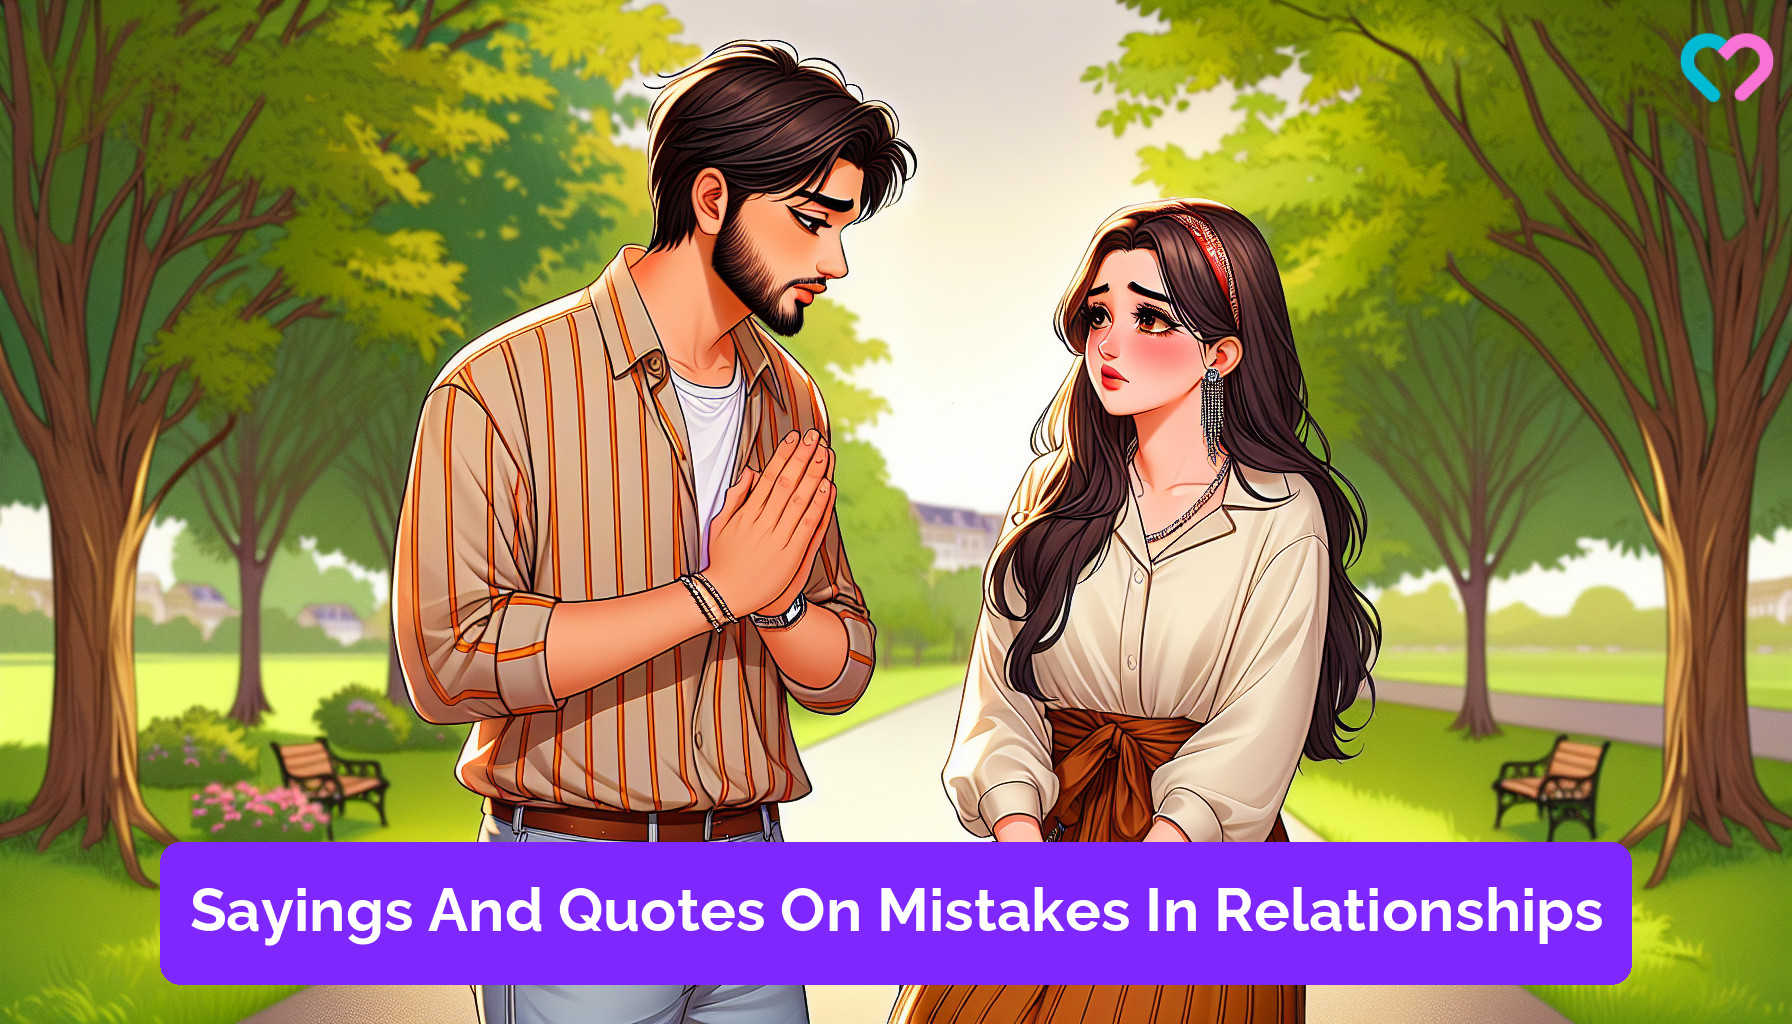 Relationship mistake quotes_illustration